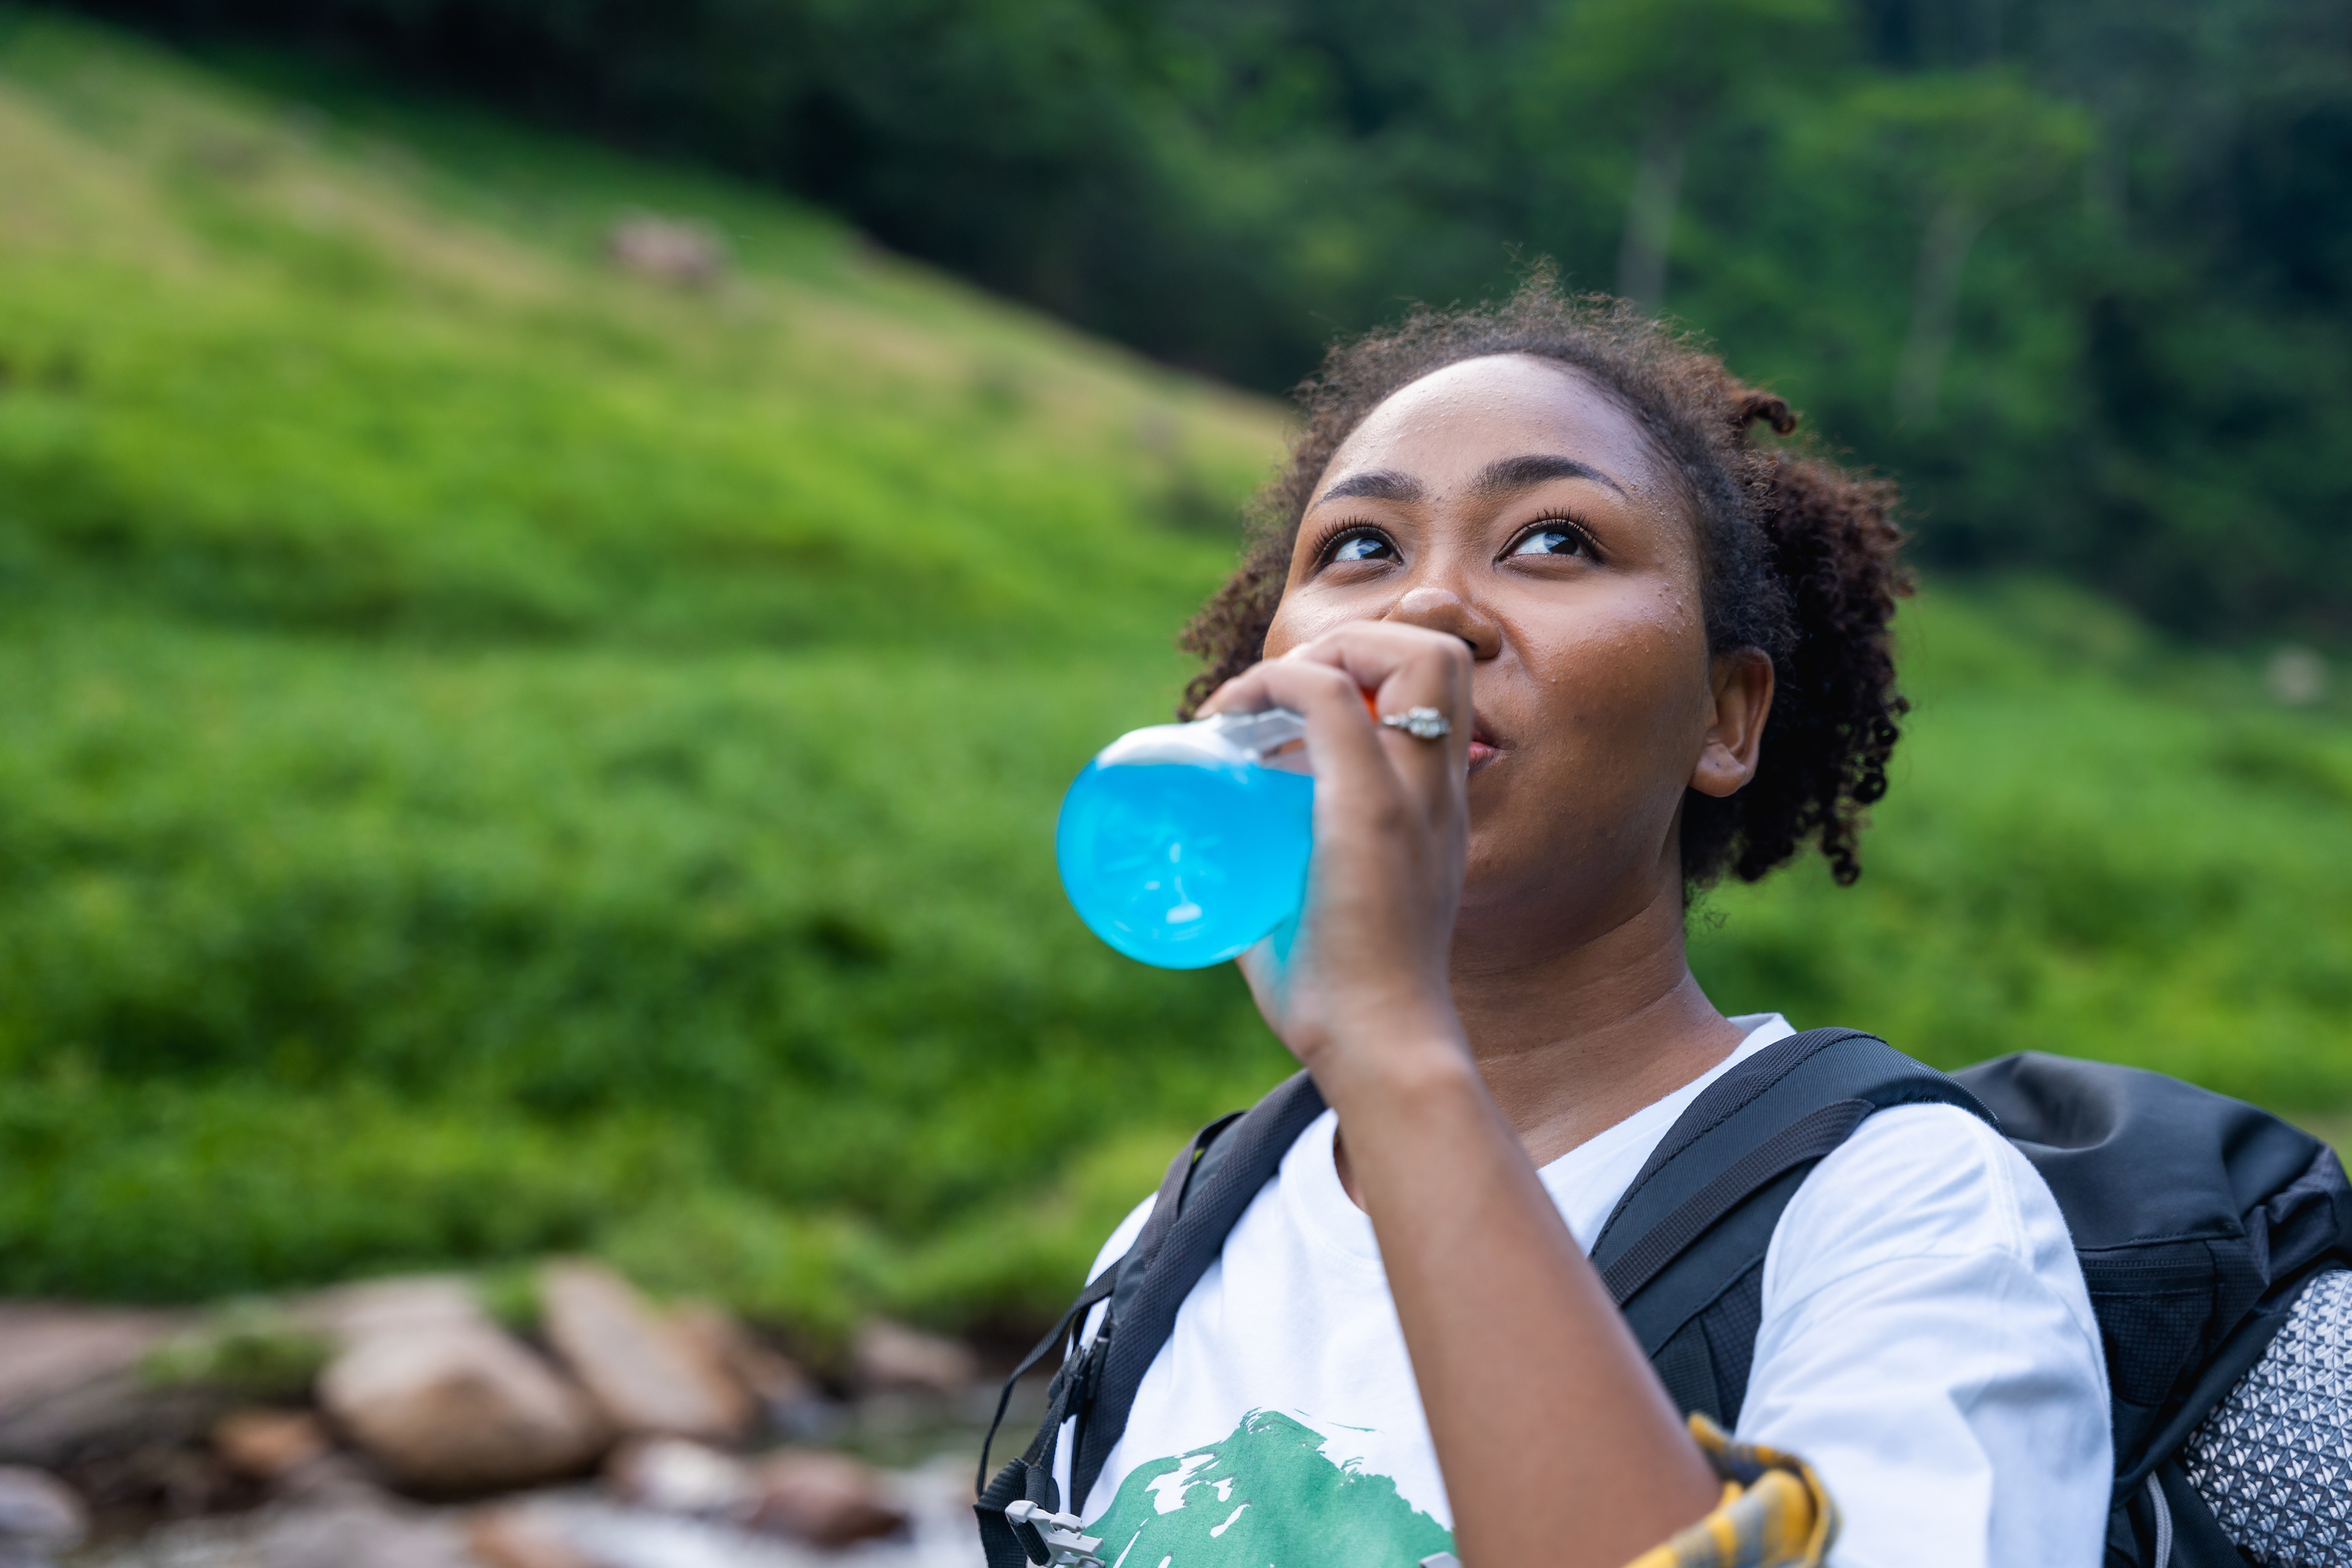 Person drinking water from a bottle outdoors with a backpack, in a natural setting